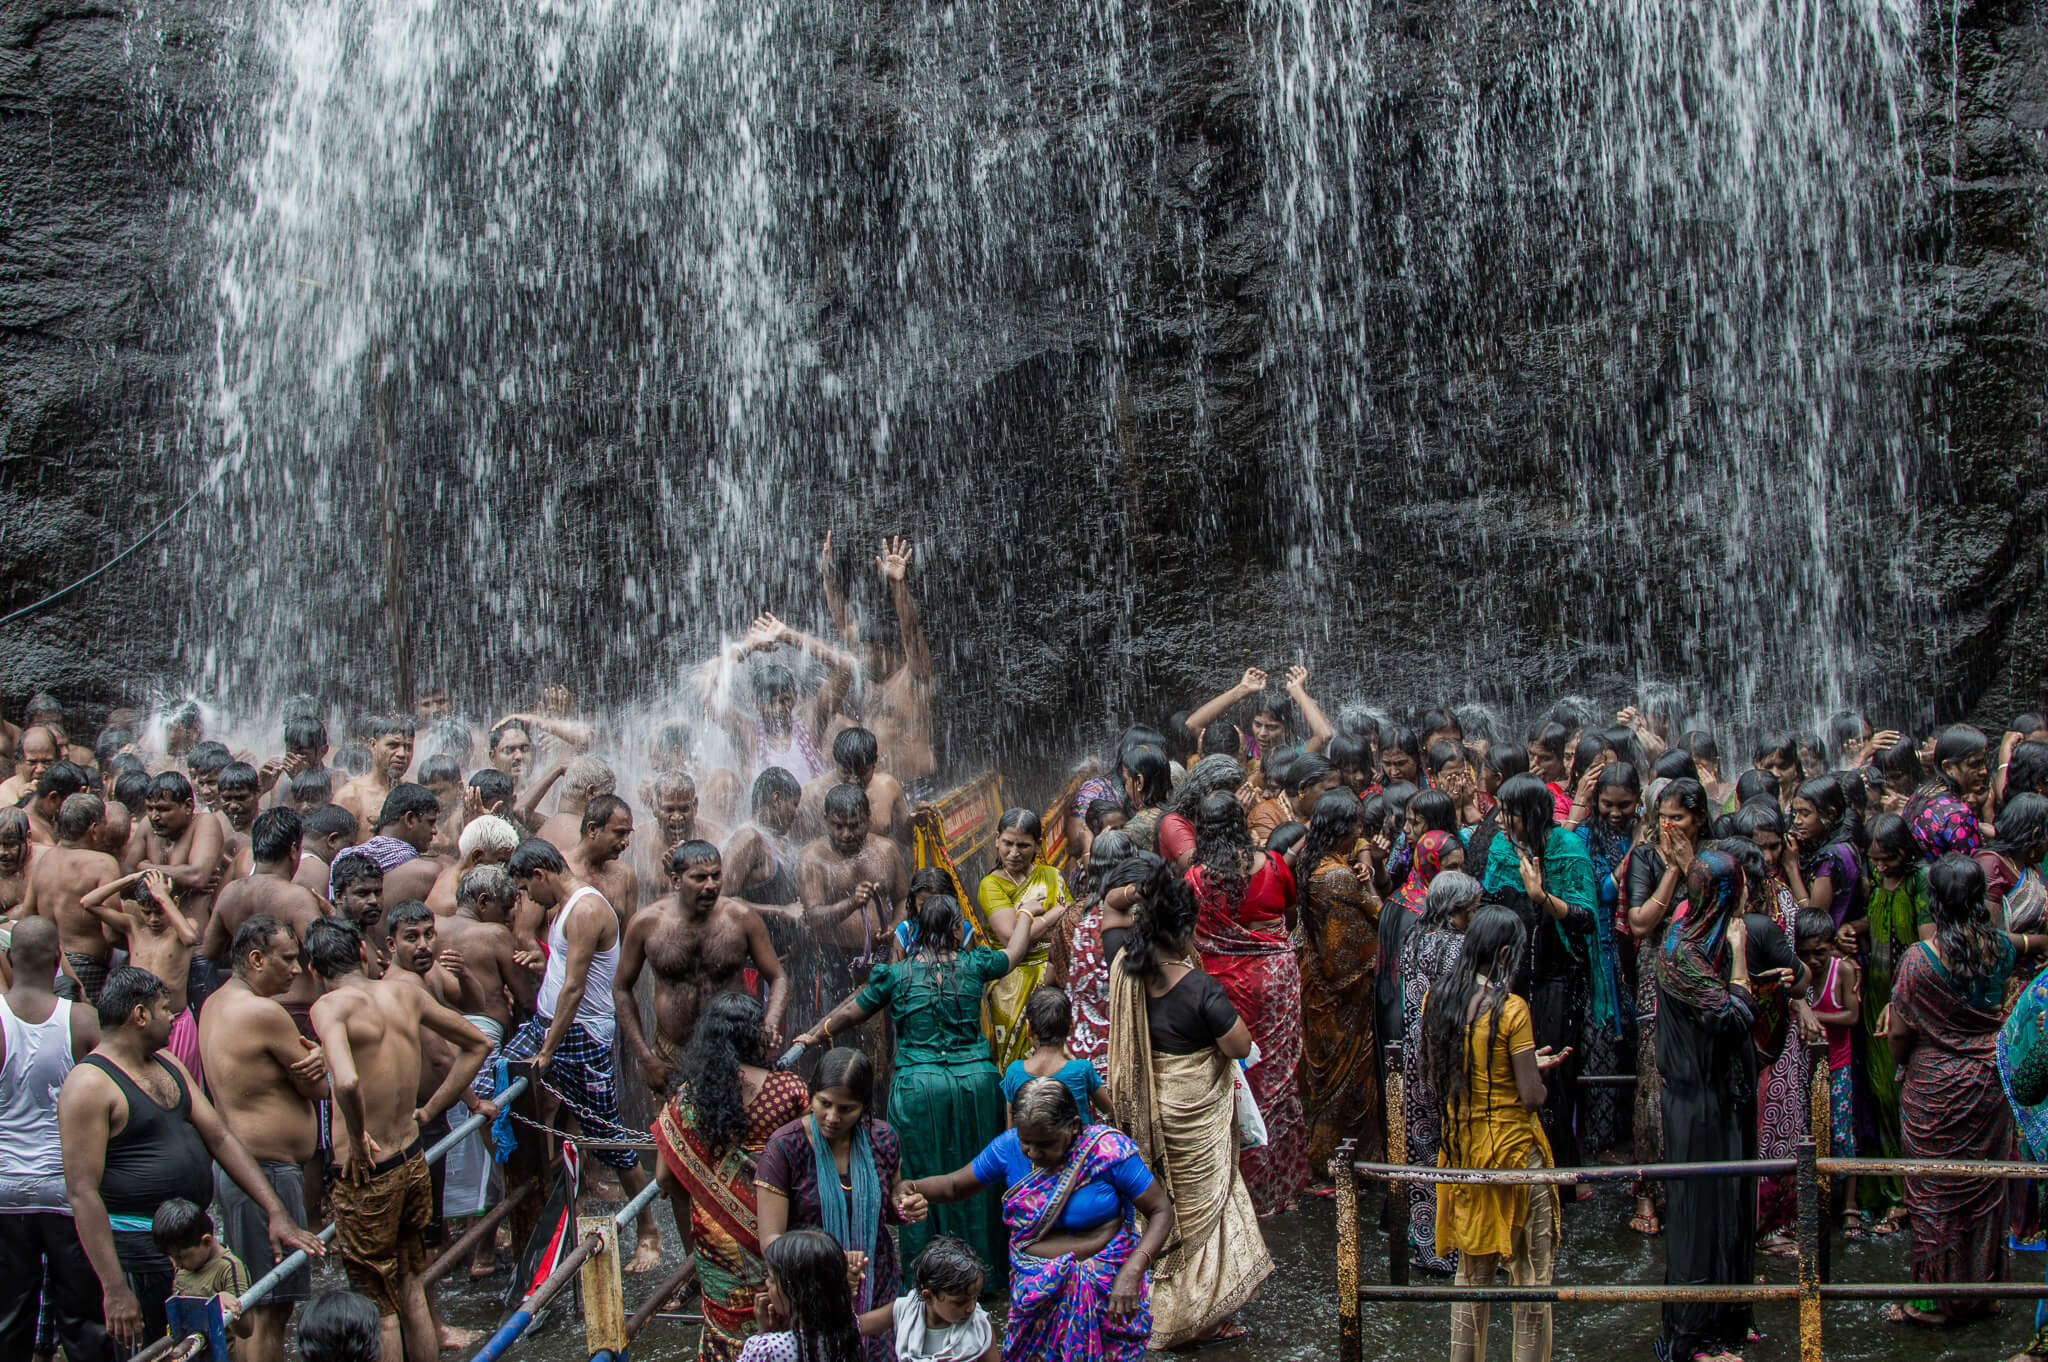 Crowd under a waterfall in Courtlam, India